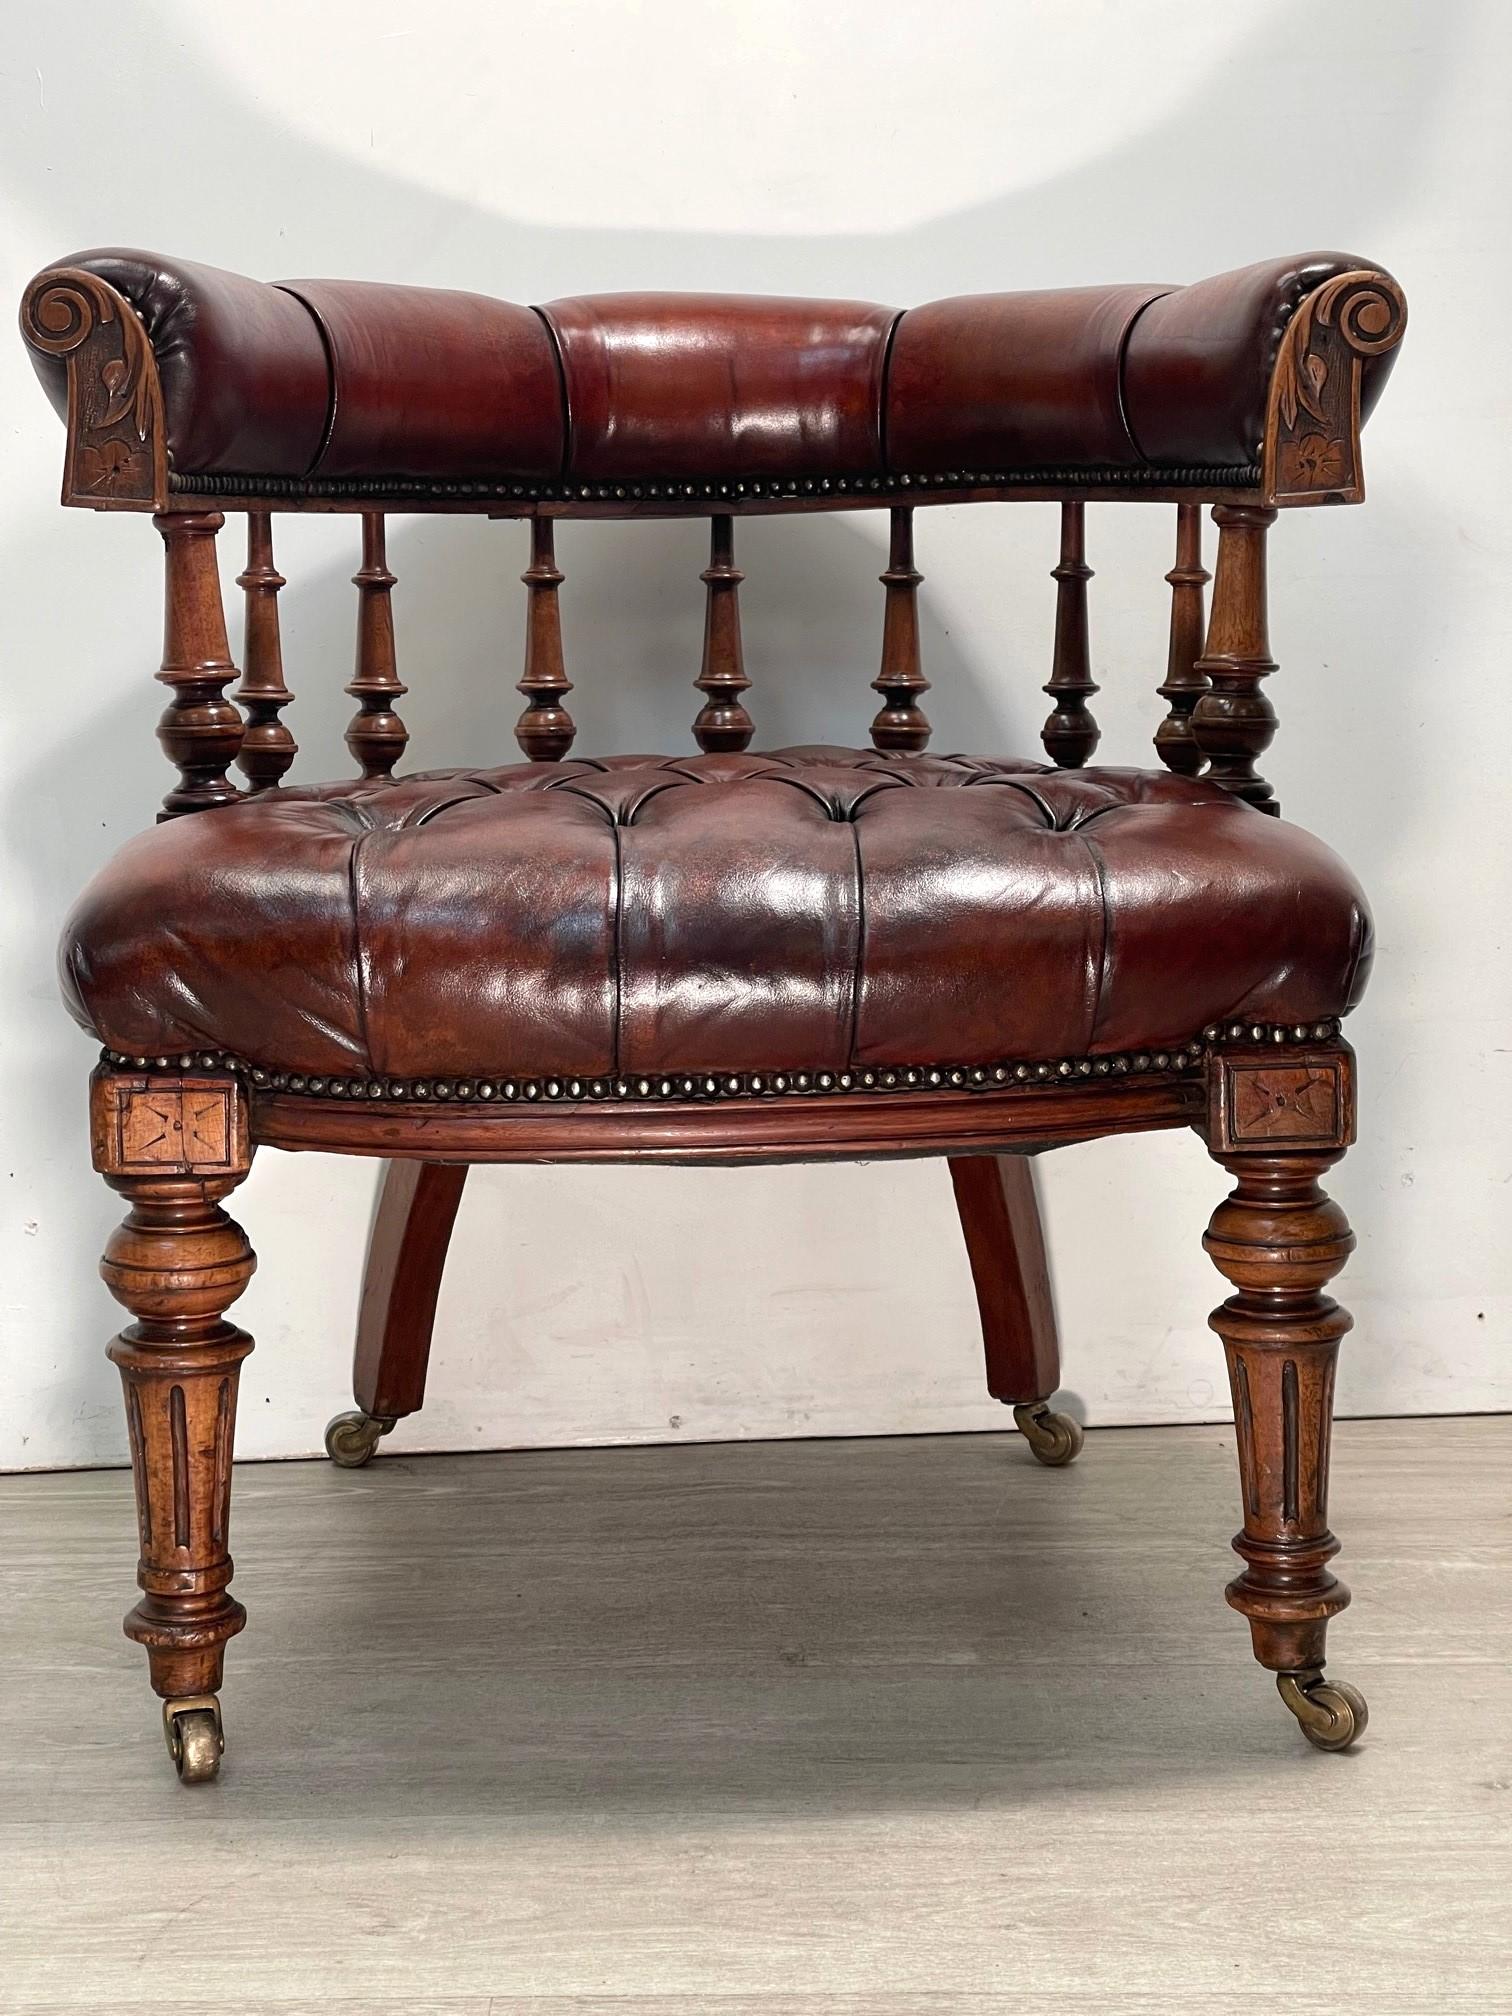 We are delighted to offer for sale this stunning, original William IV circa 1830 fully restored, hand dyed brown leather Chesterfield office chair 

One of the best-looking chairs we’ve had come through the workshop in some time, its hand carved